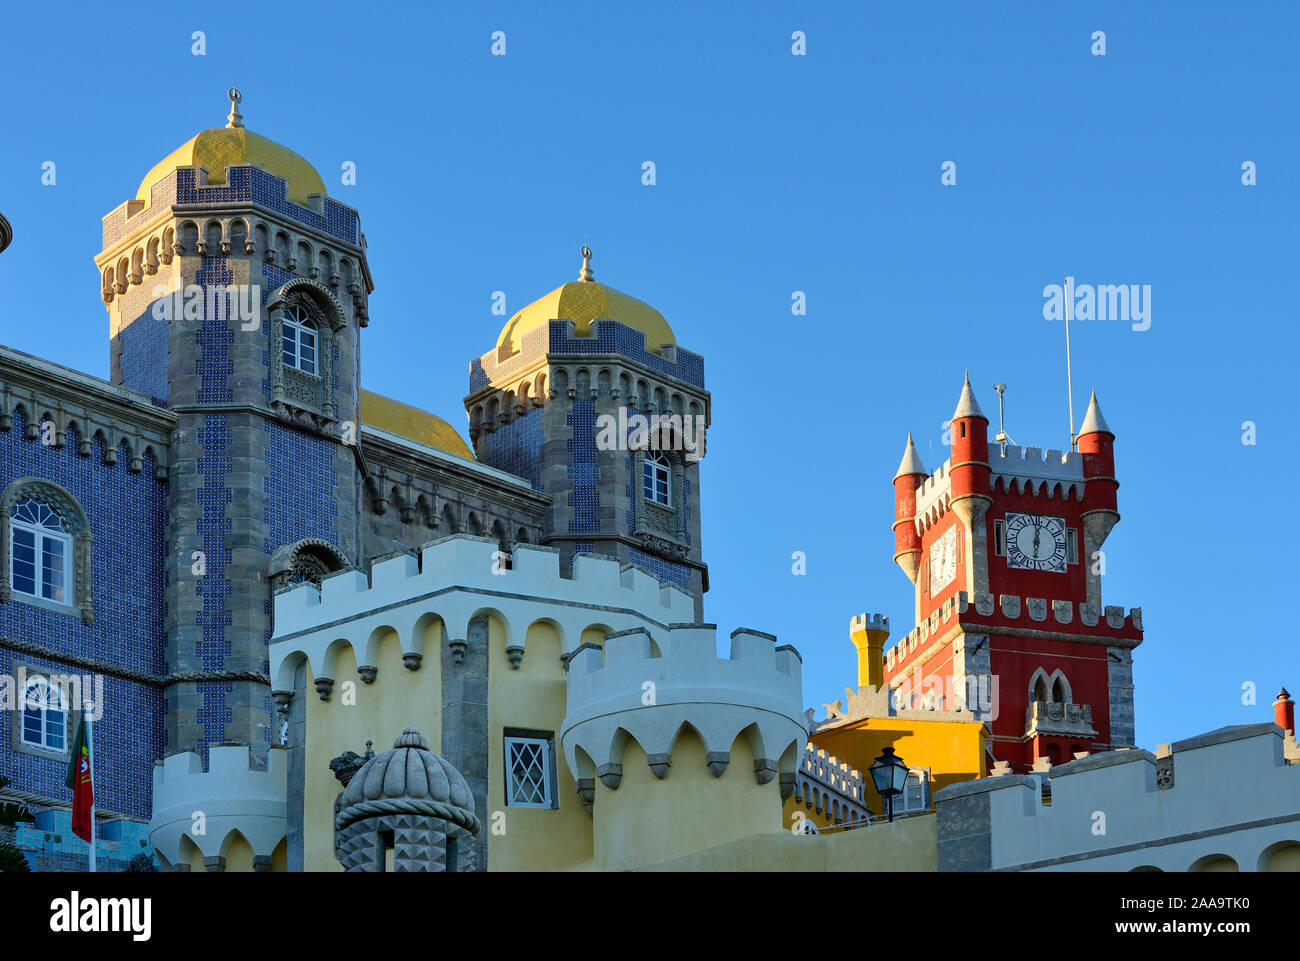 Palácio da Pena, built in the 19th century on the hills above Sintra, in the middle of a UNESCO World Heritage Site. Sintra, Portugal Stock Photo